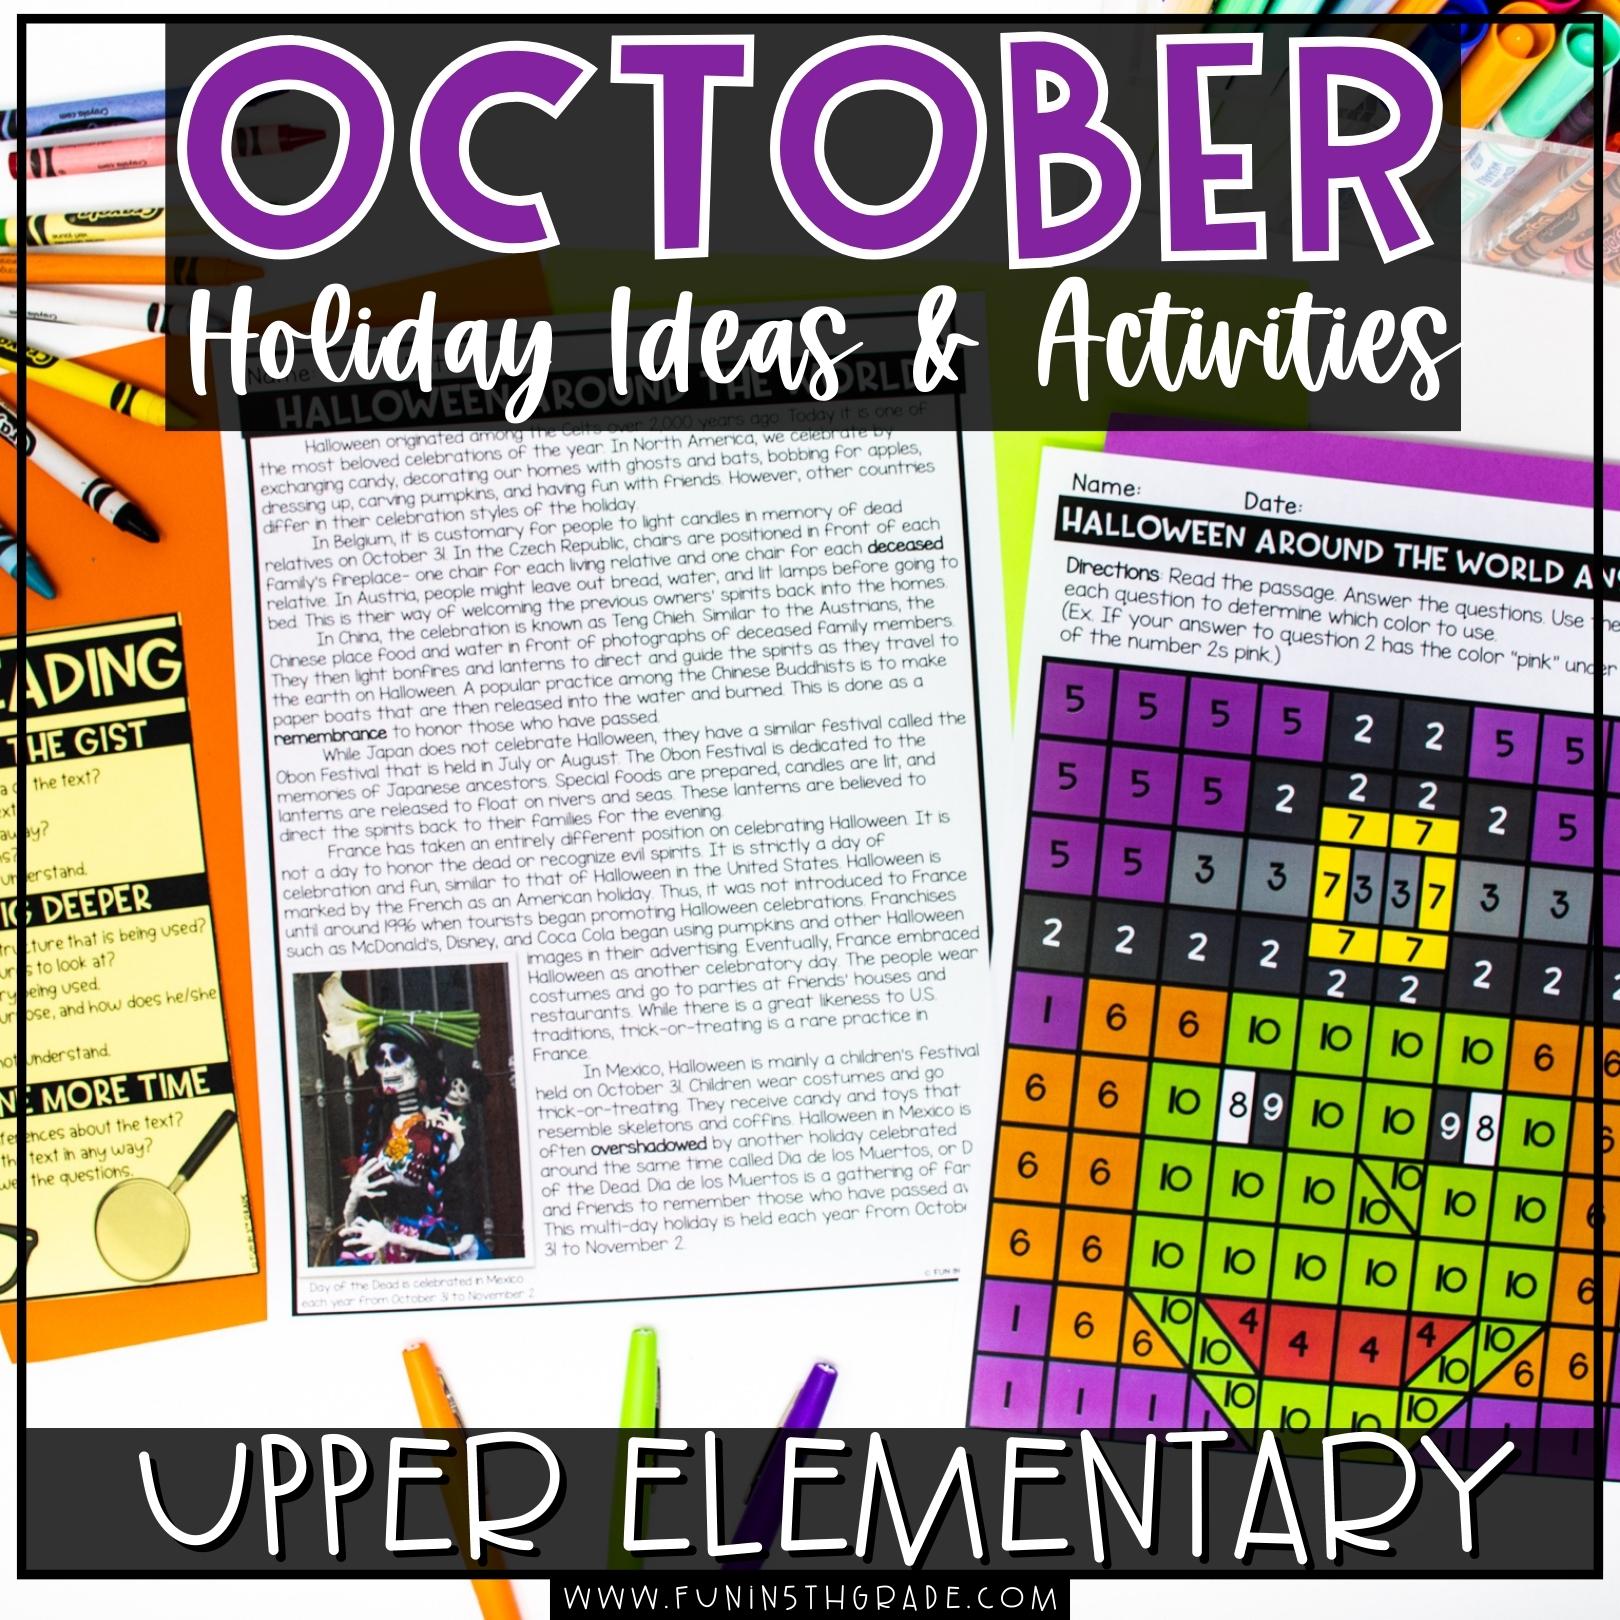 October Holiday Activities and Ideas